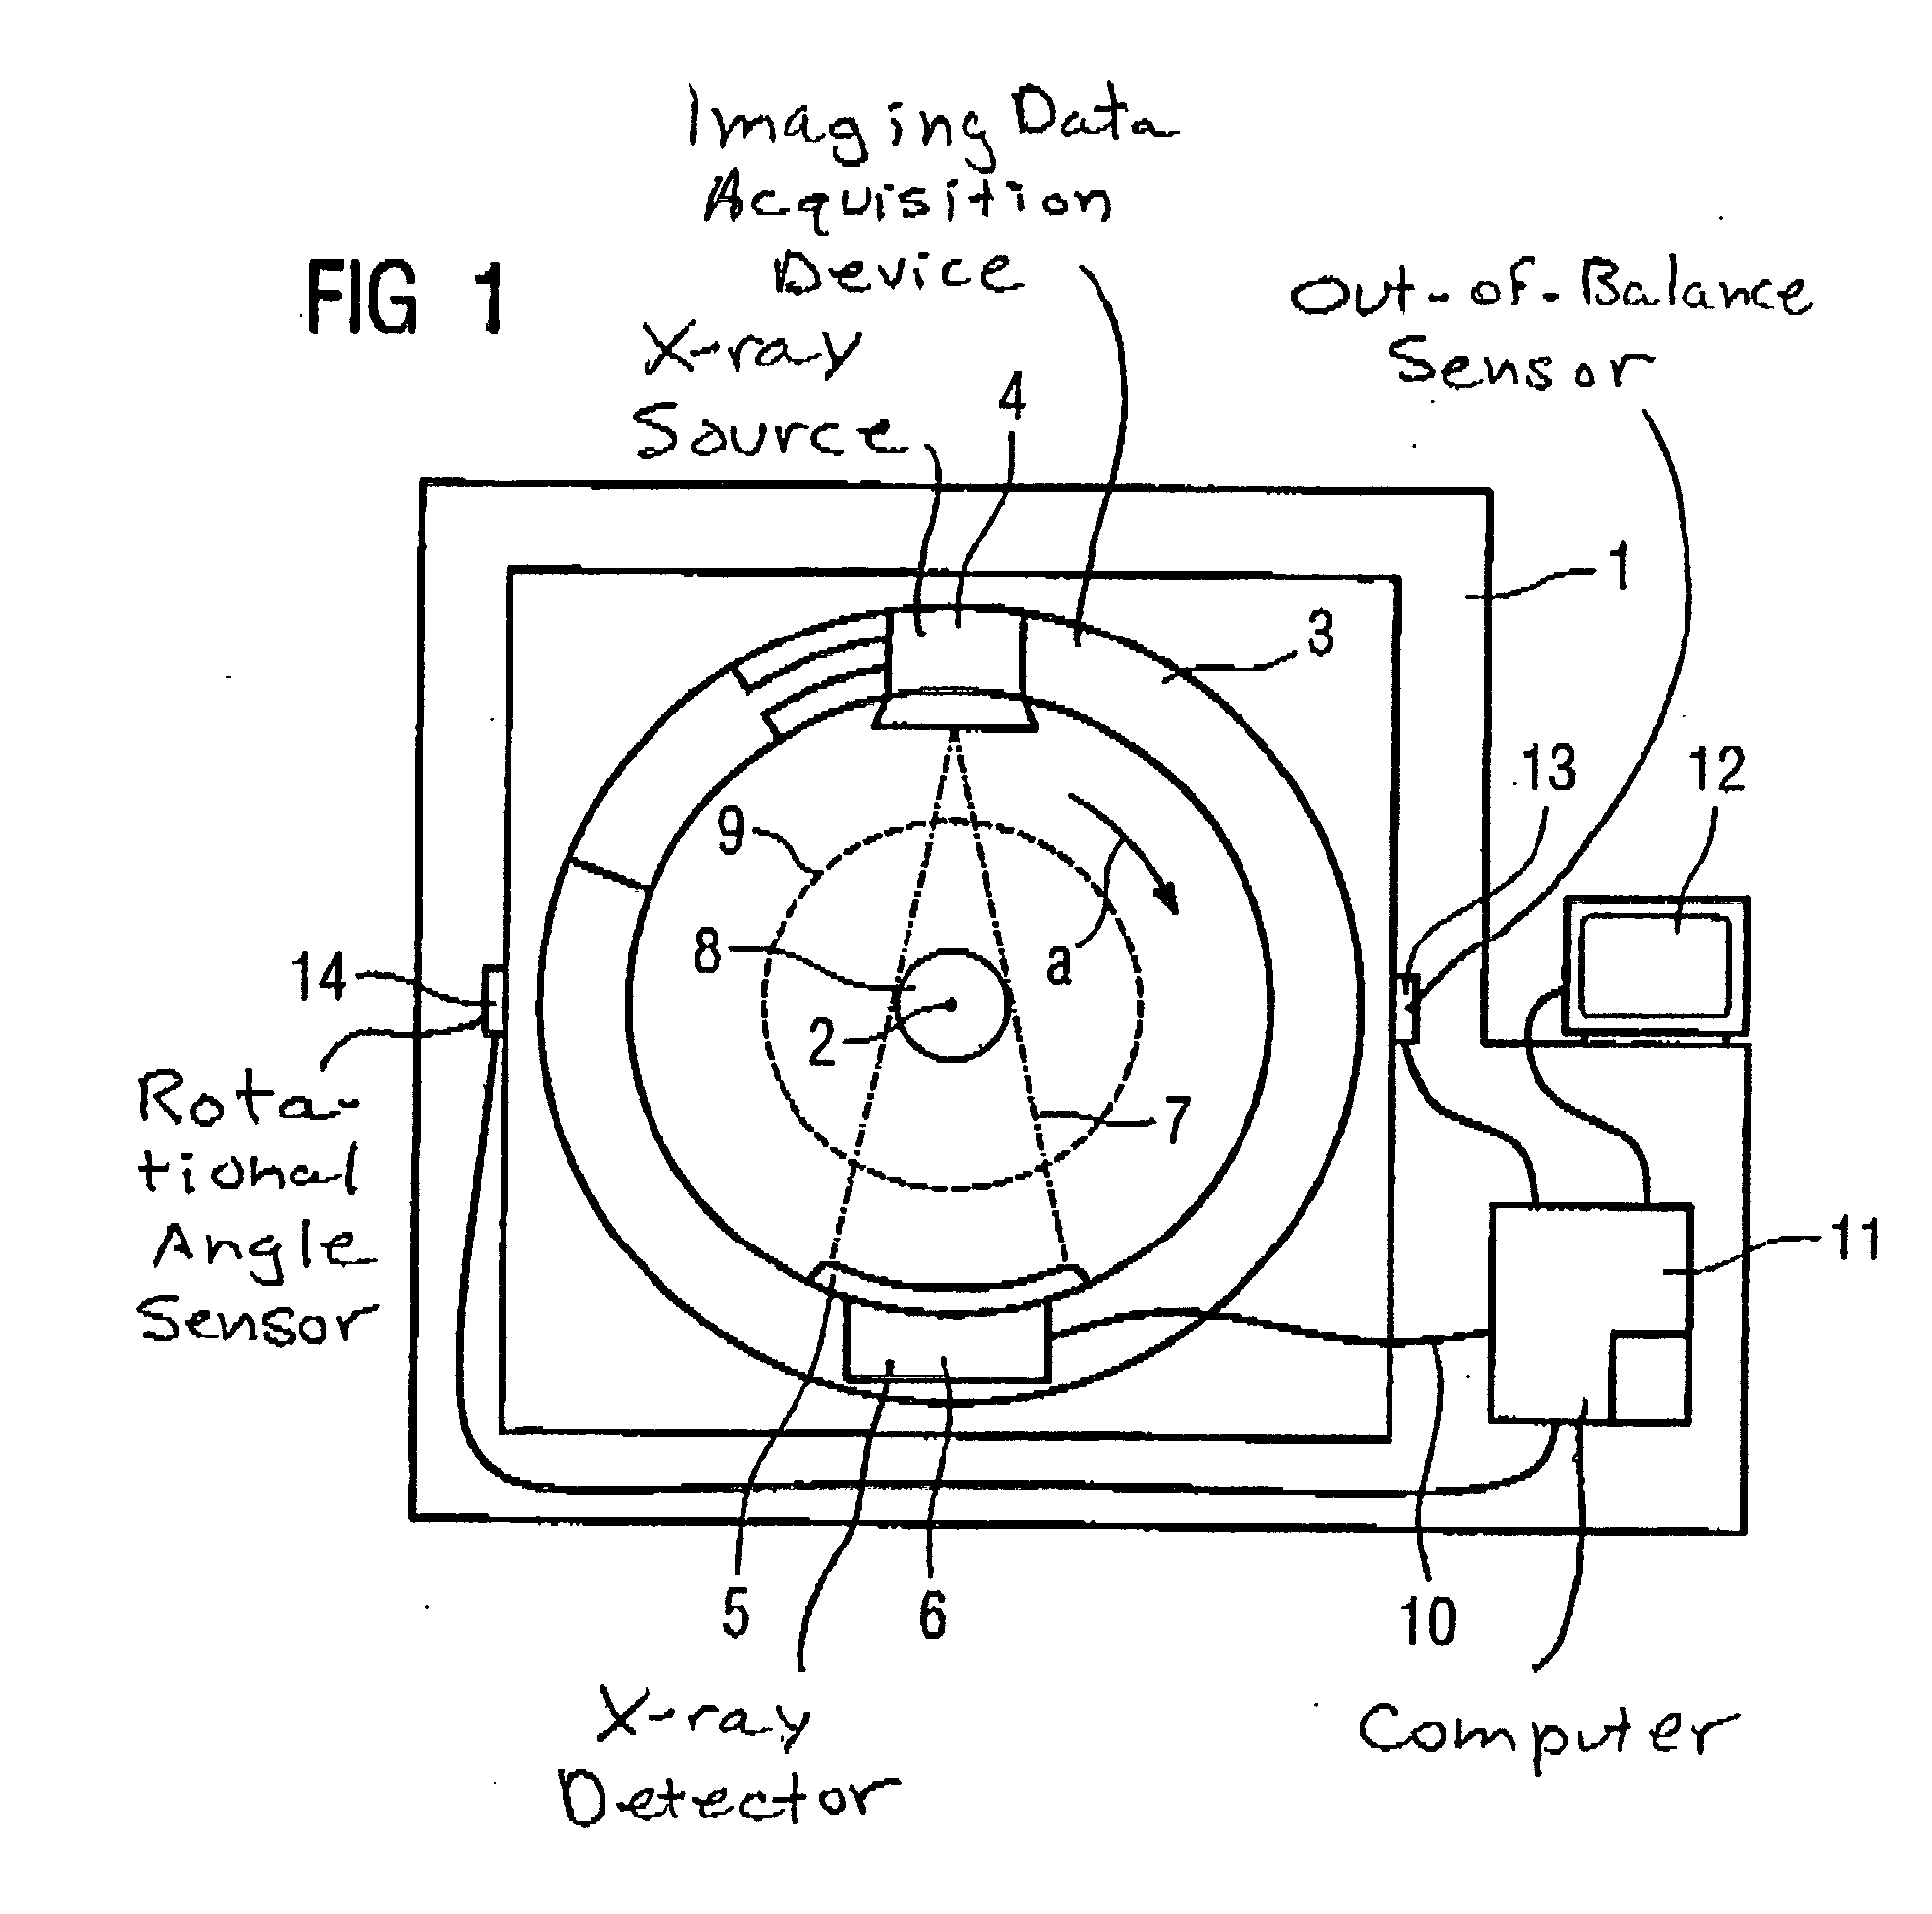 Method for compensating an out-of-balance condition of a rotating body